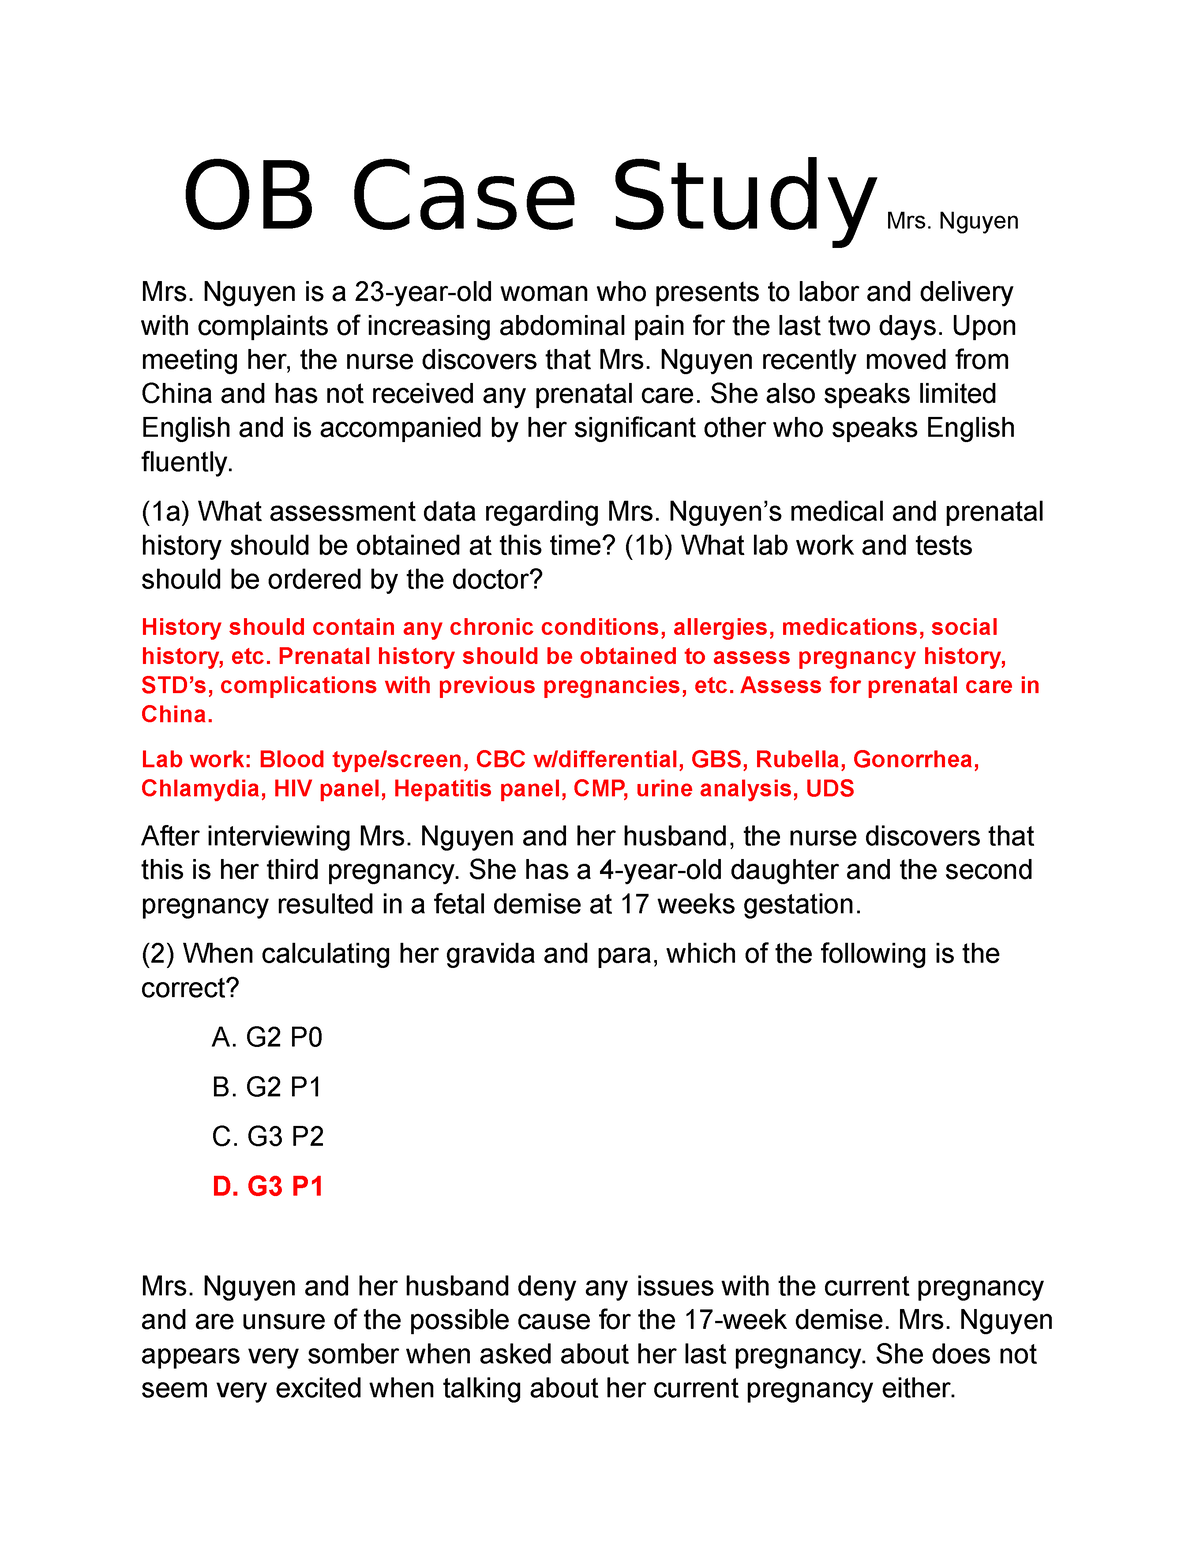 case study related to ob